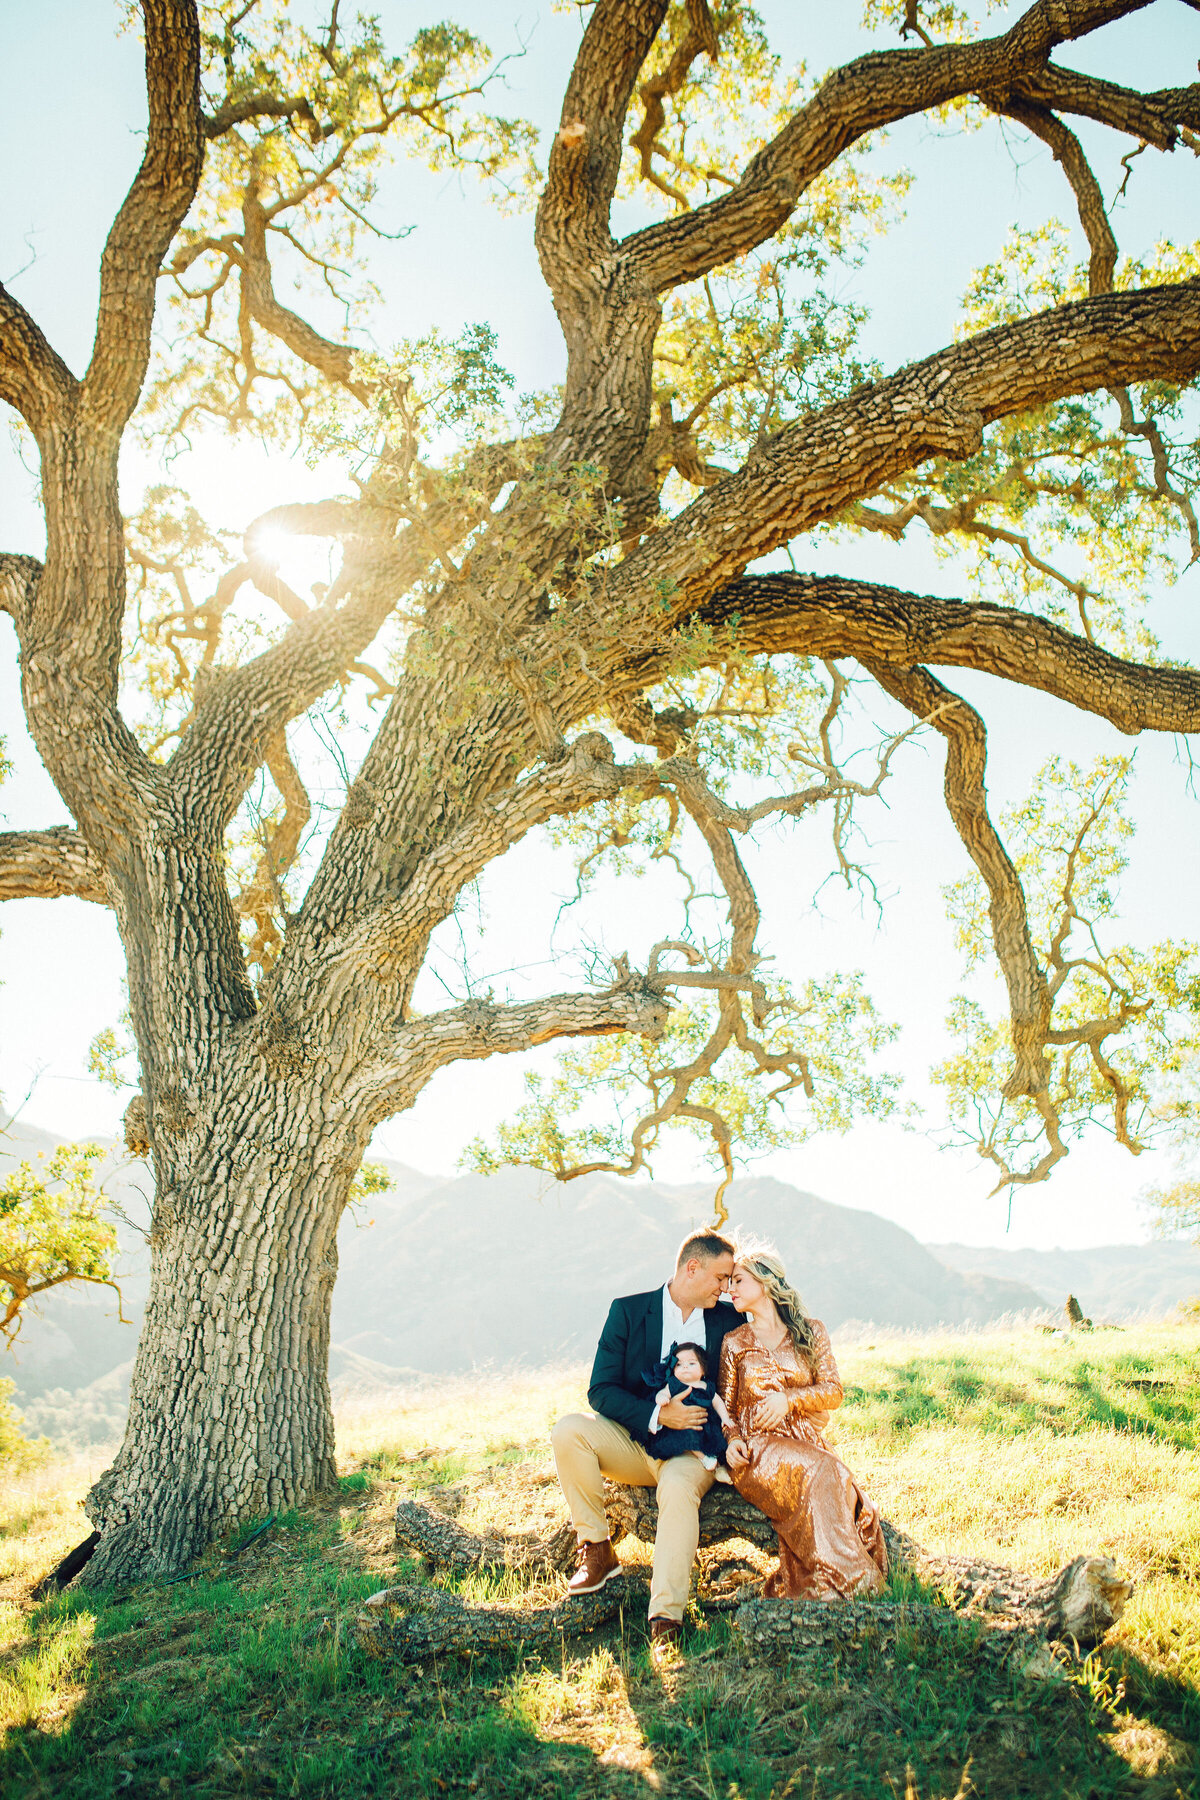 Family Portrait Photo Of Couple Kissing Under a Tree With Their Child Los Angeles